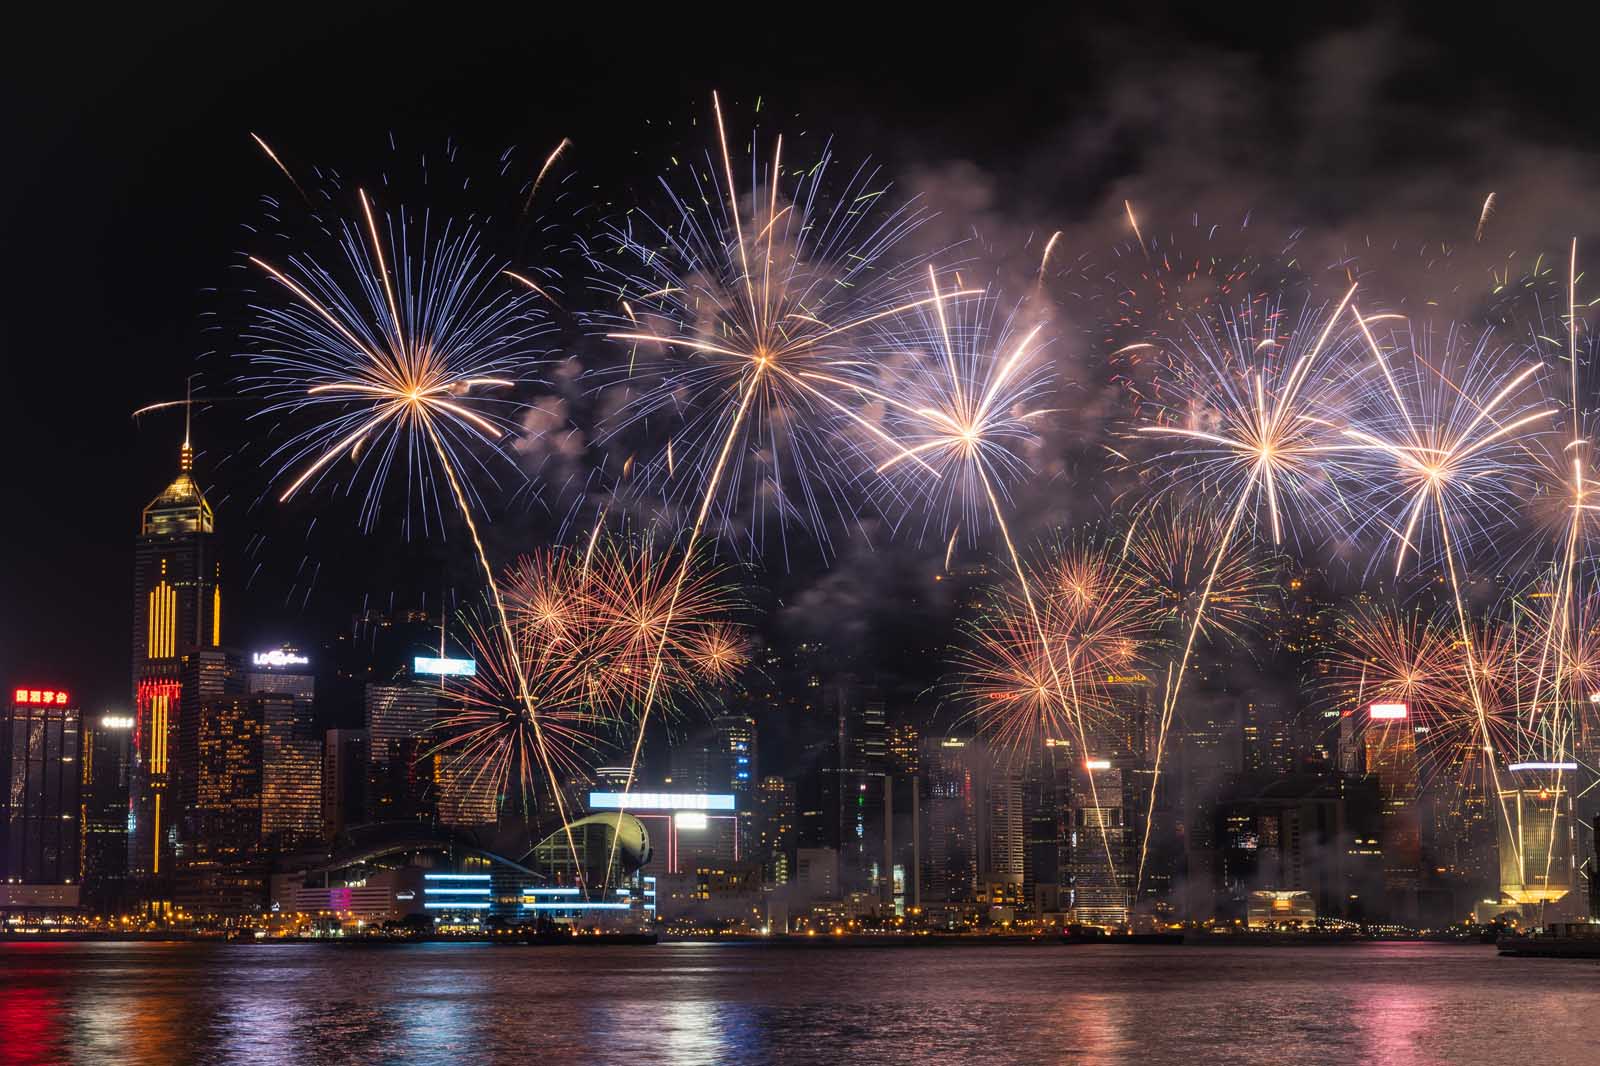 Fireworks on New Years Eve in Hong Kong